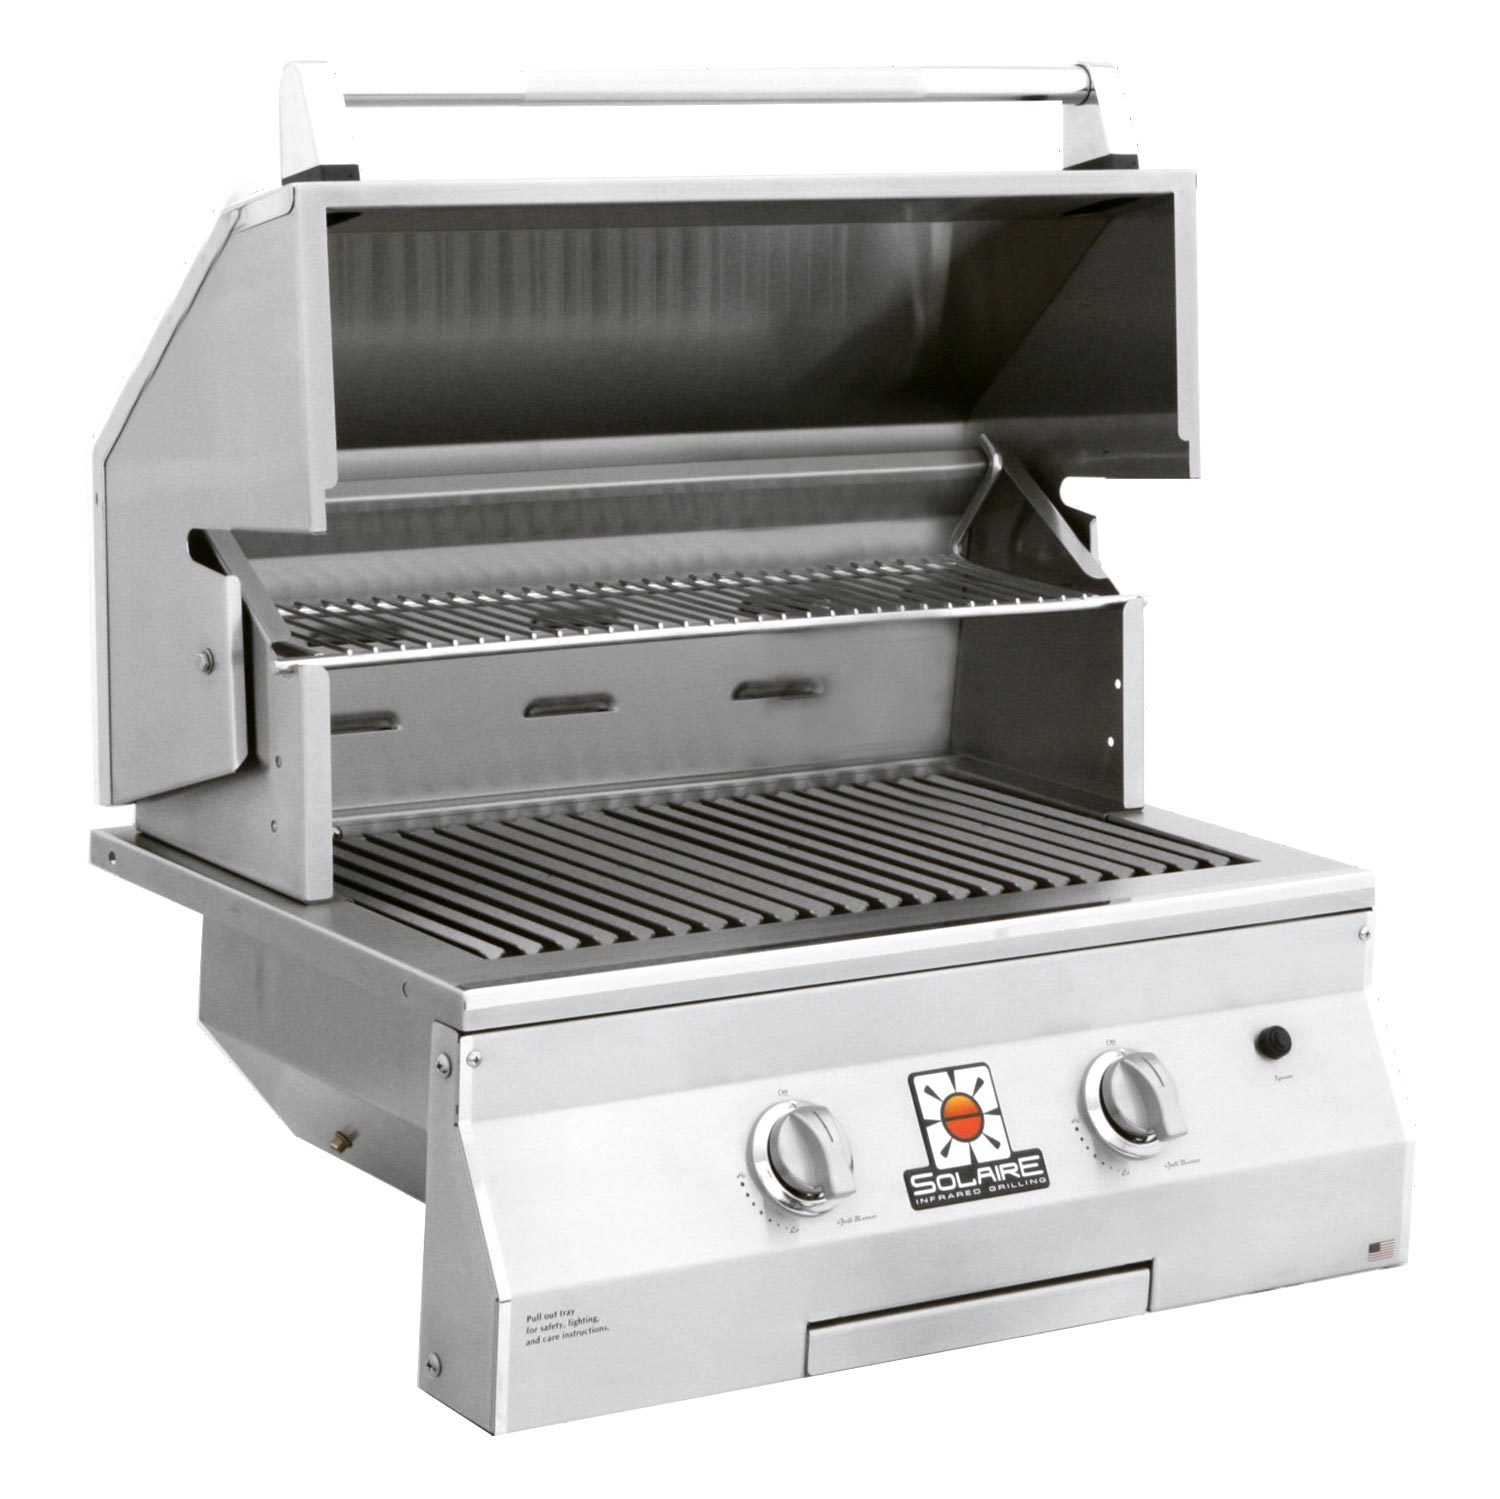 Solaire Standard Infrared Built-In Grill, 27-Inches, Natural Gas - image 2 of 6